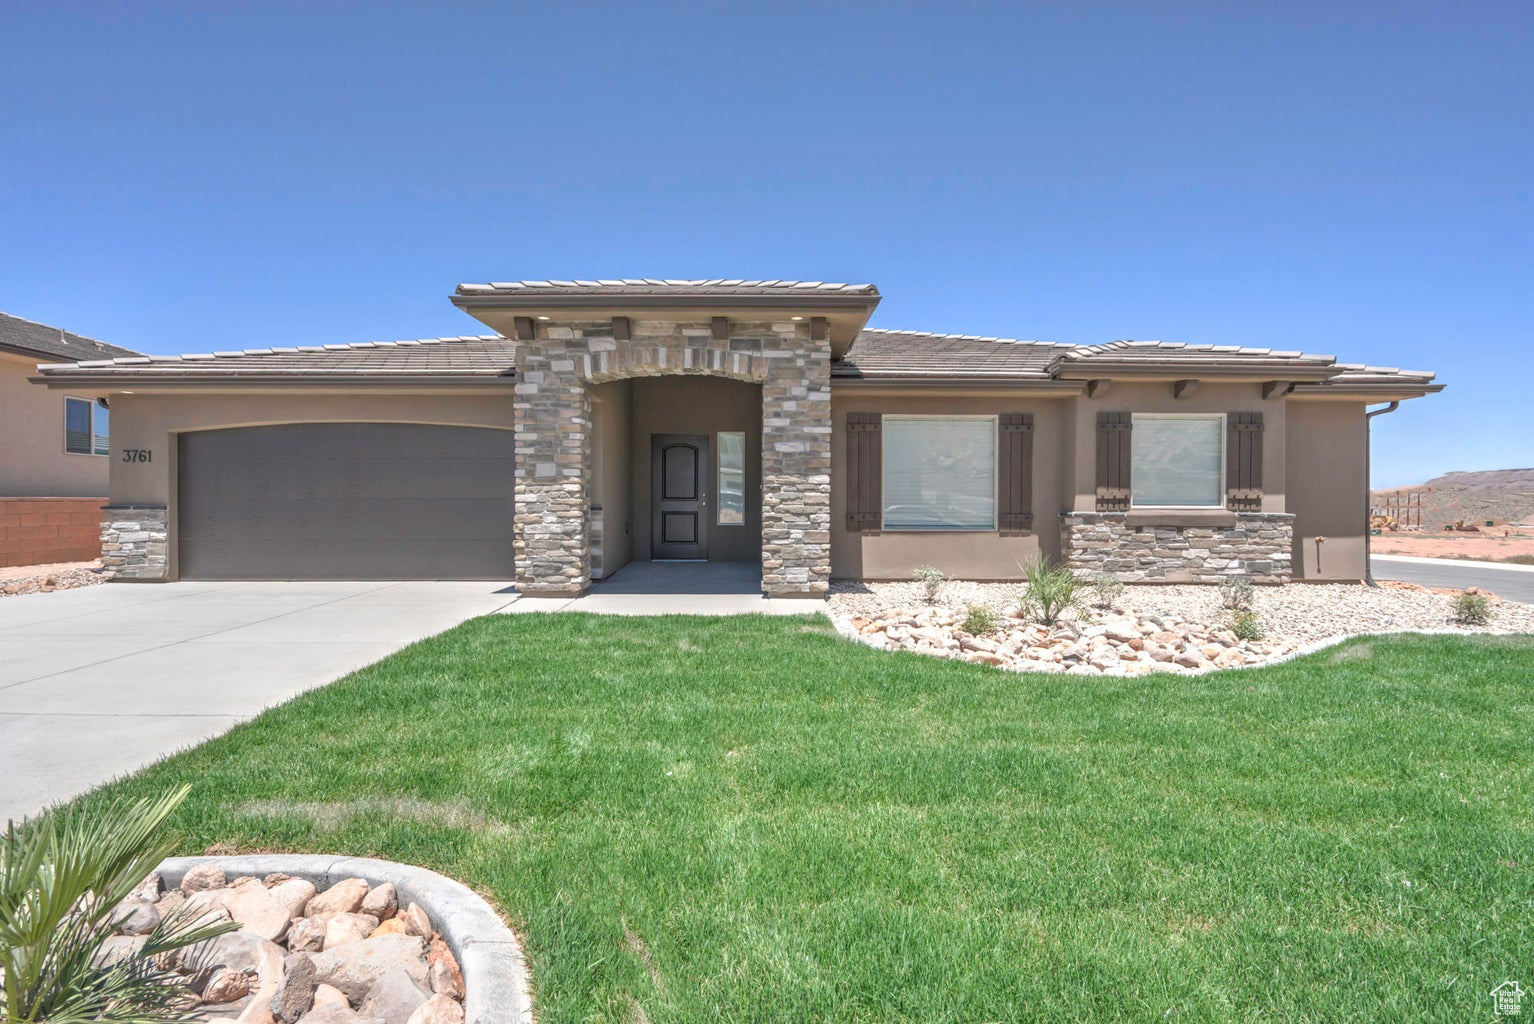 3761 E IRON, St. George, Utah 84790, 4 Bedrooms Bedrooms, 11 Rooms Rooms,2 BathroomsBathrooms,Residential,For sale,IRON,1995082